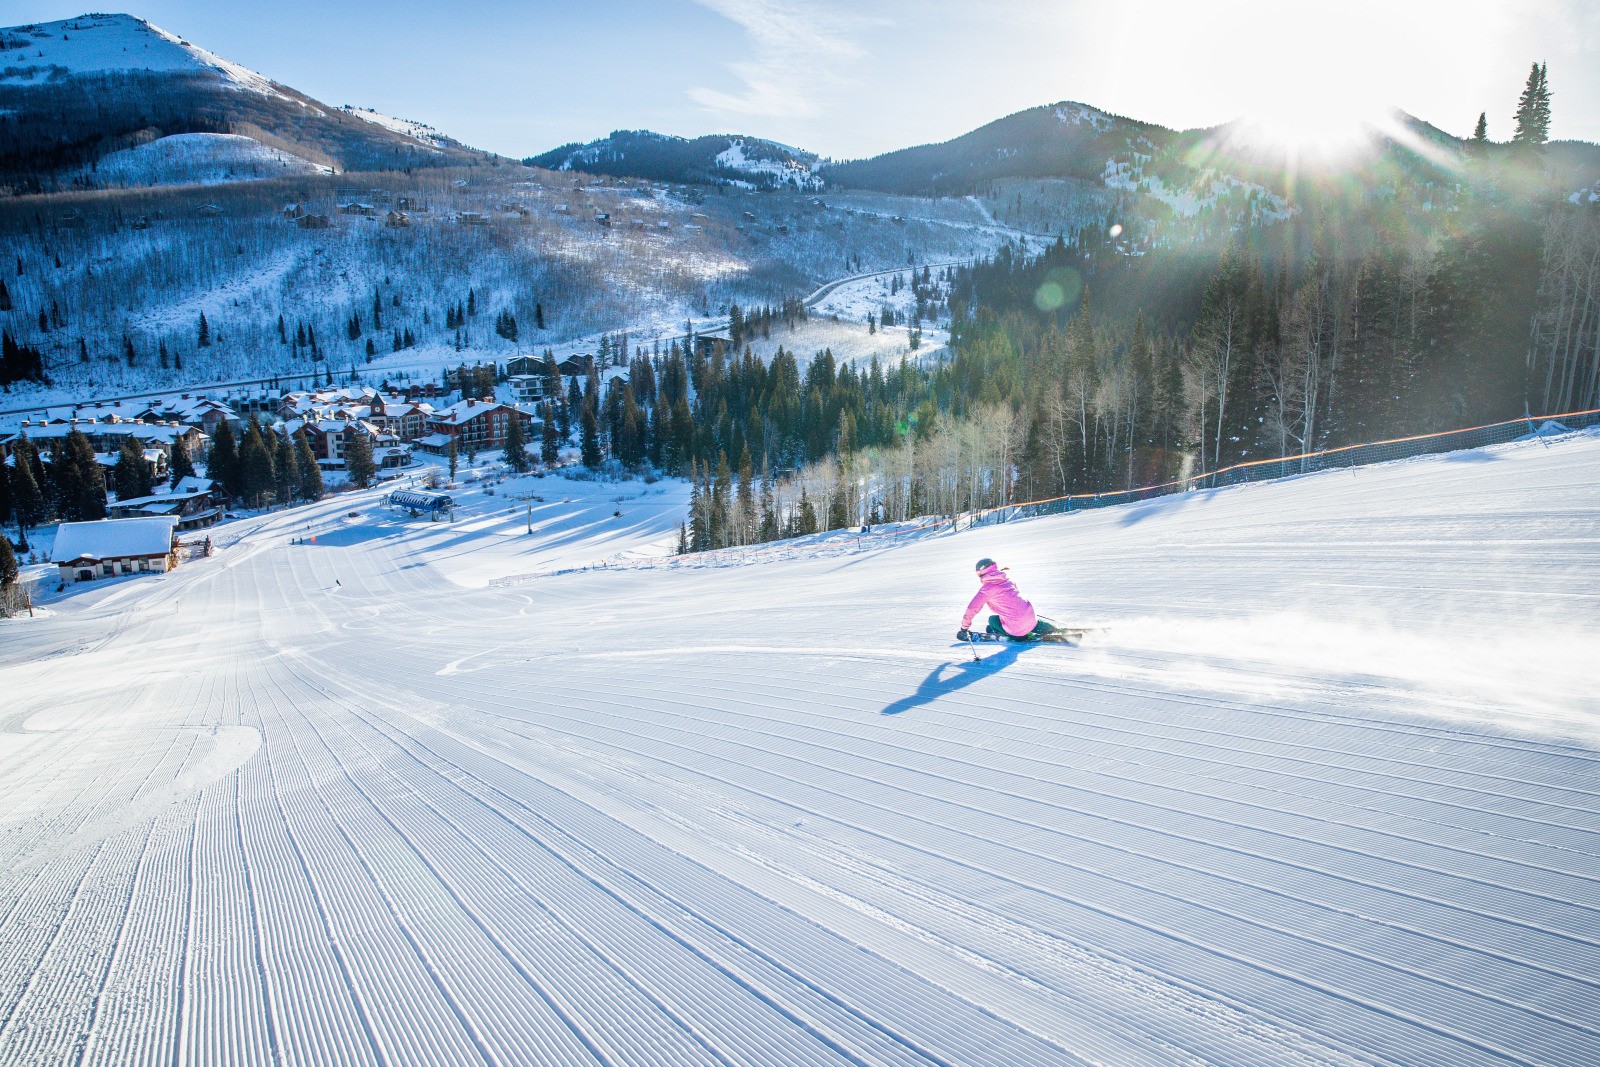 A Weekend Escape at Solitude Mountain Resort